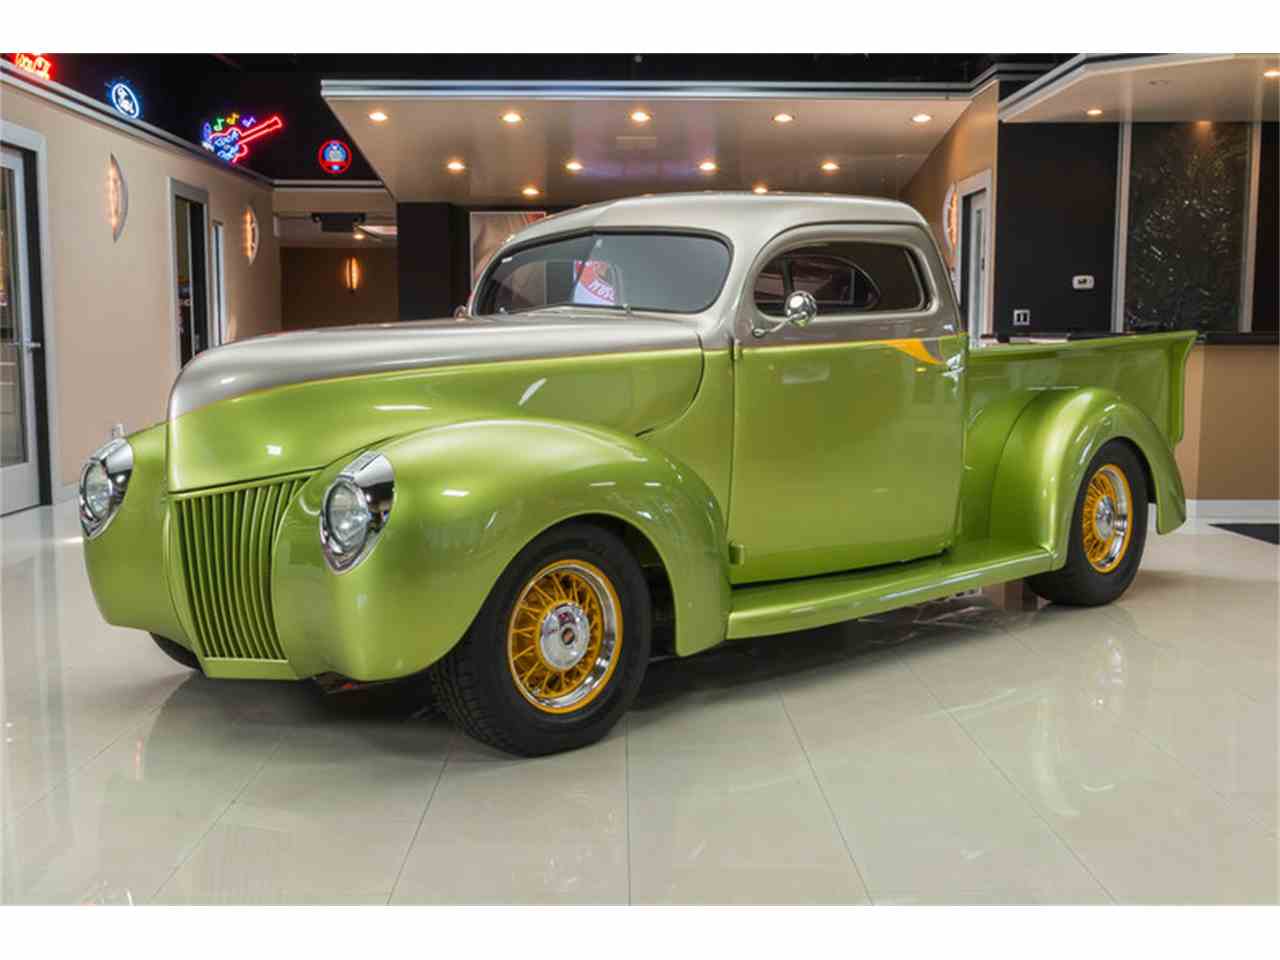 1940 Ford Pickup for Sale  ClassicCars.com  CC902530